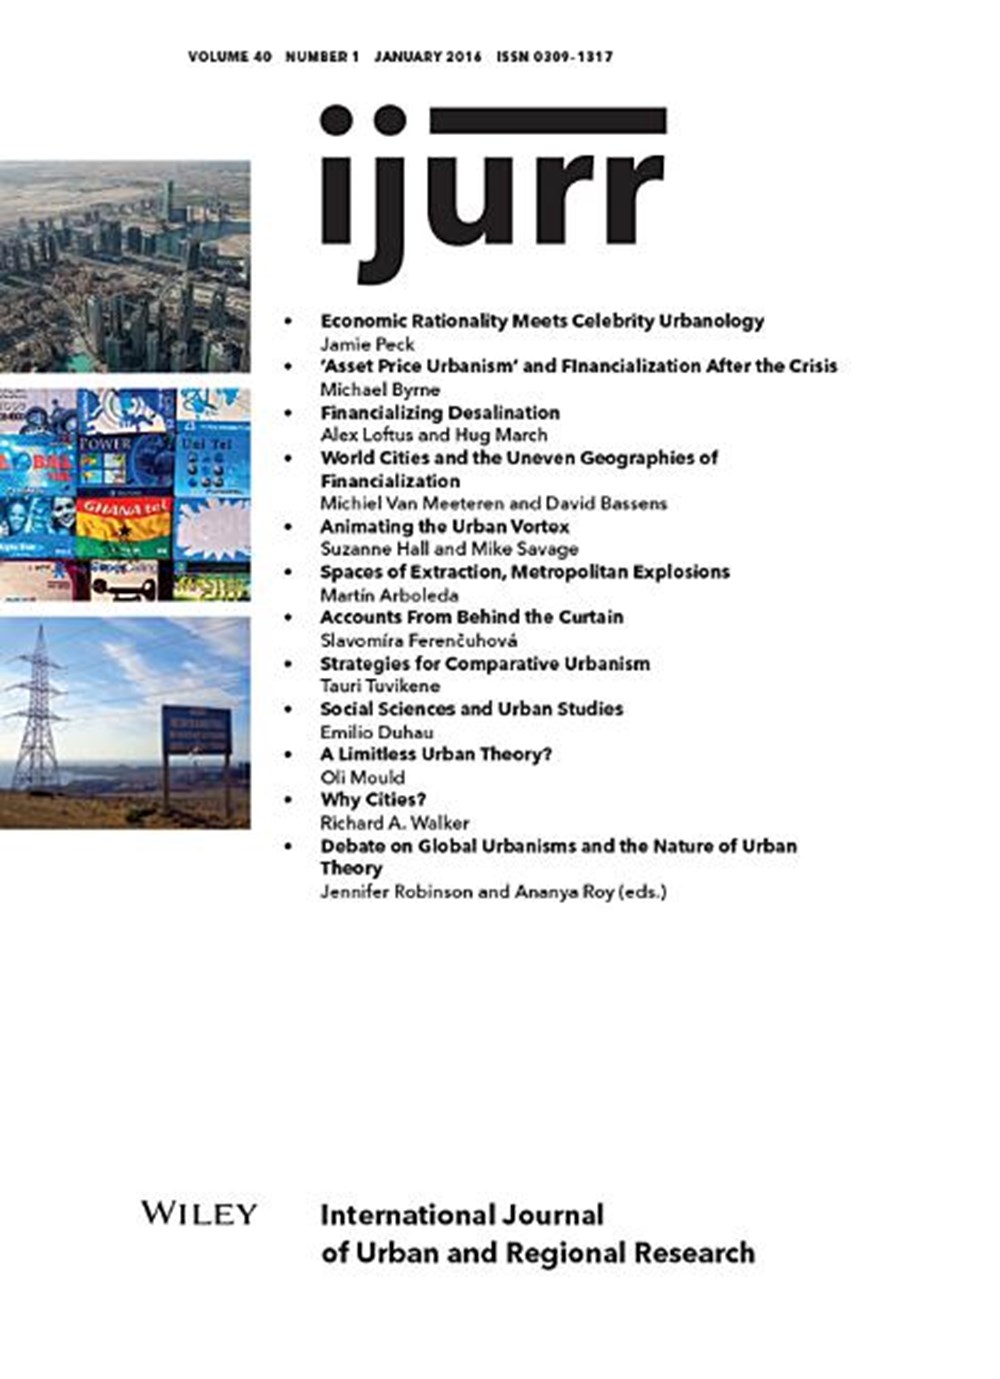 International Journal of Urban and Regional Research, Volume 40, Issue 1